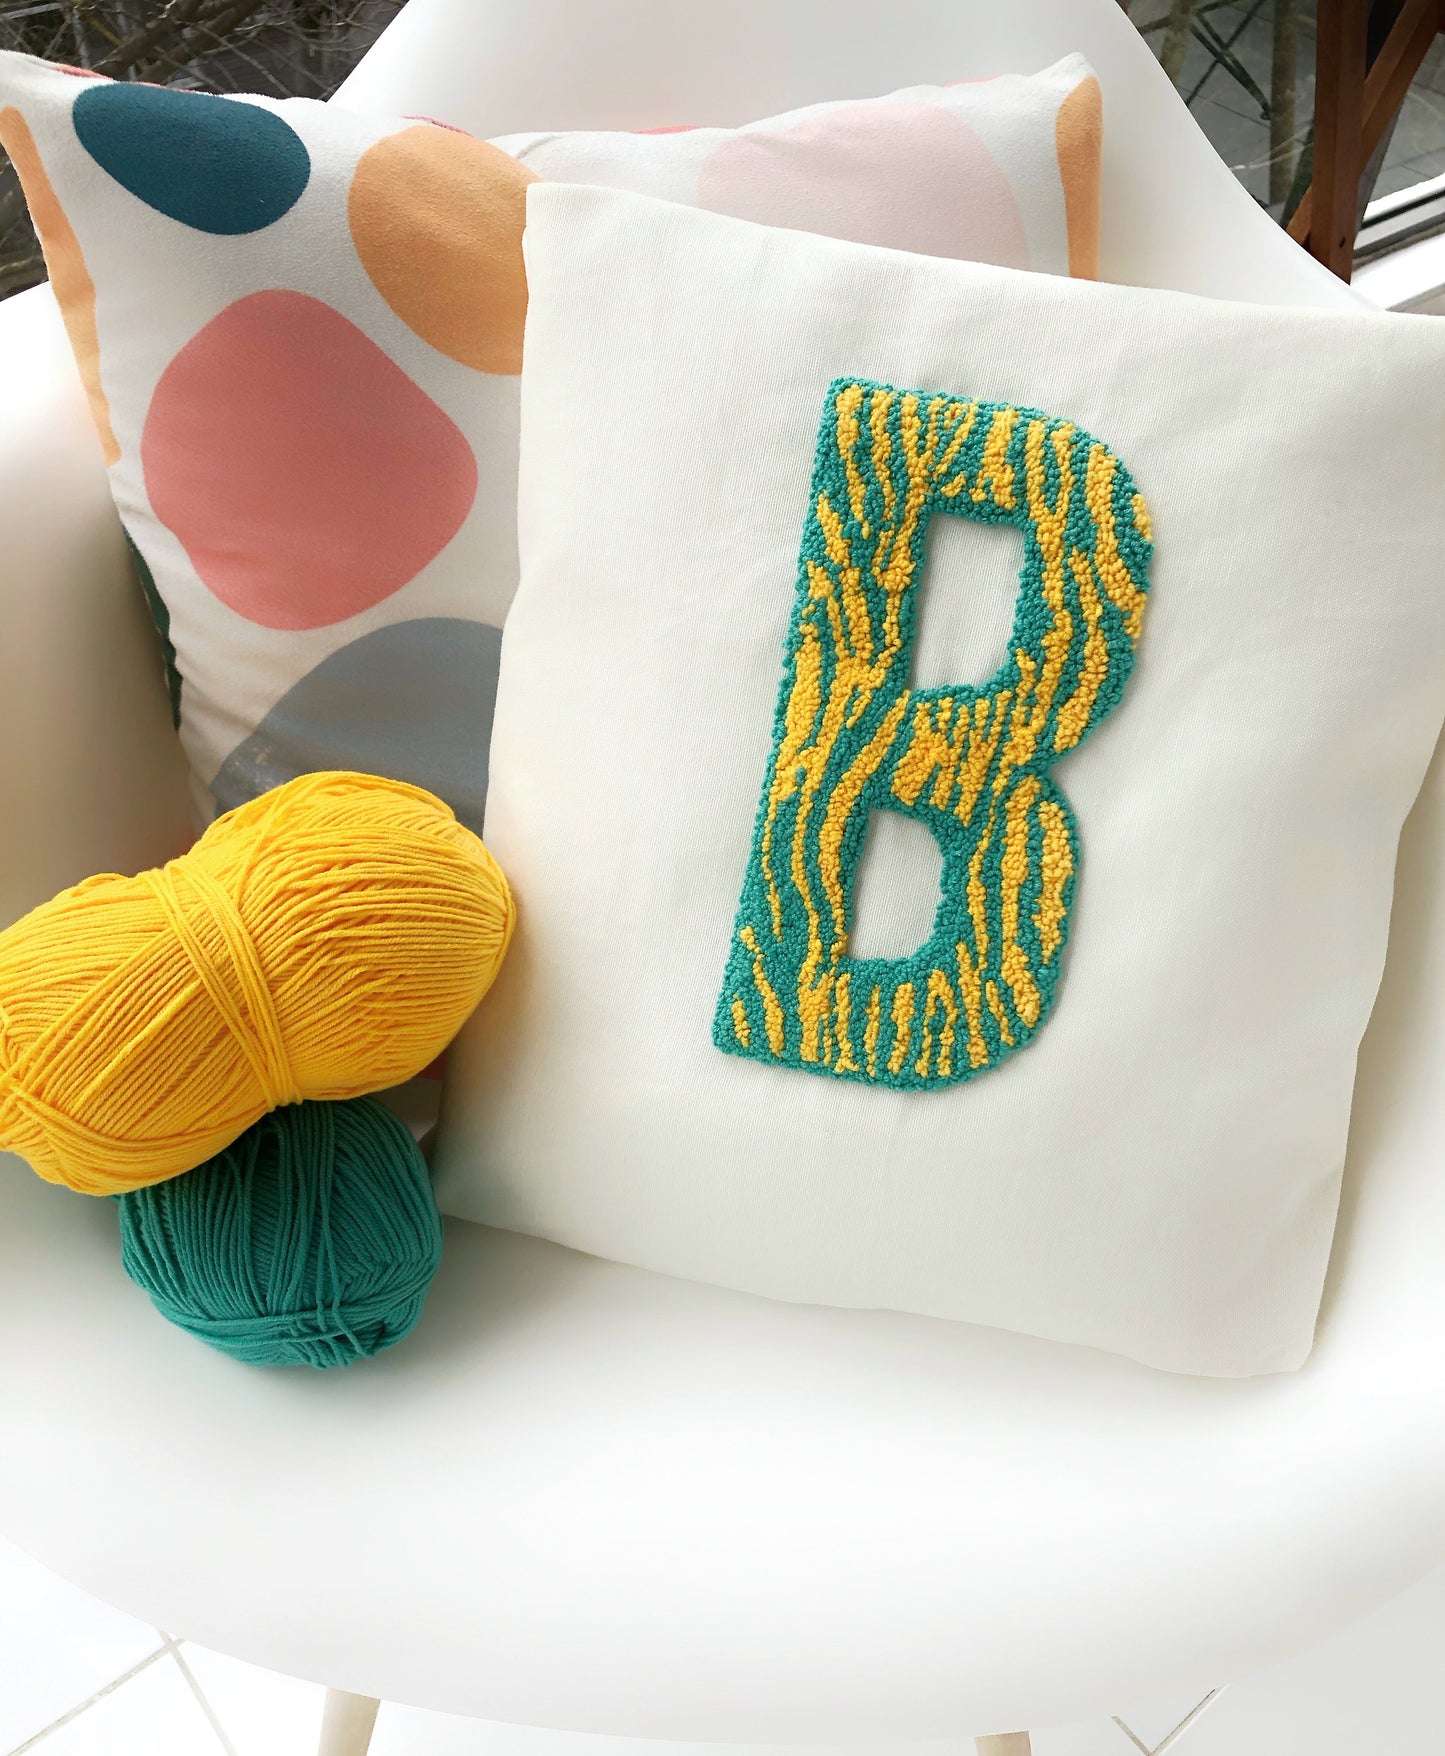 Customizable Monogram Embroidered Cushion Cover